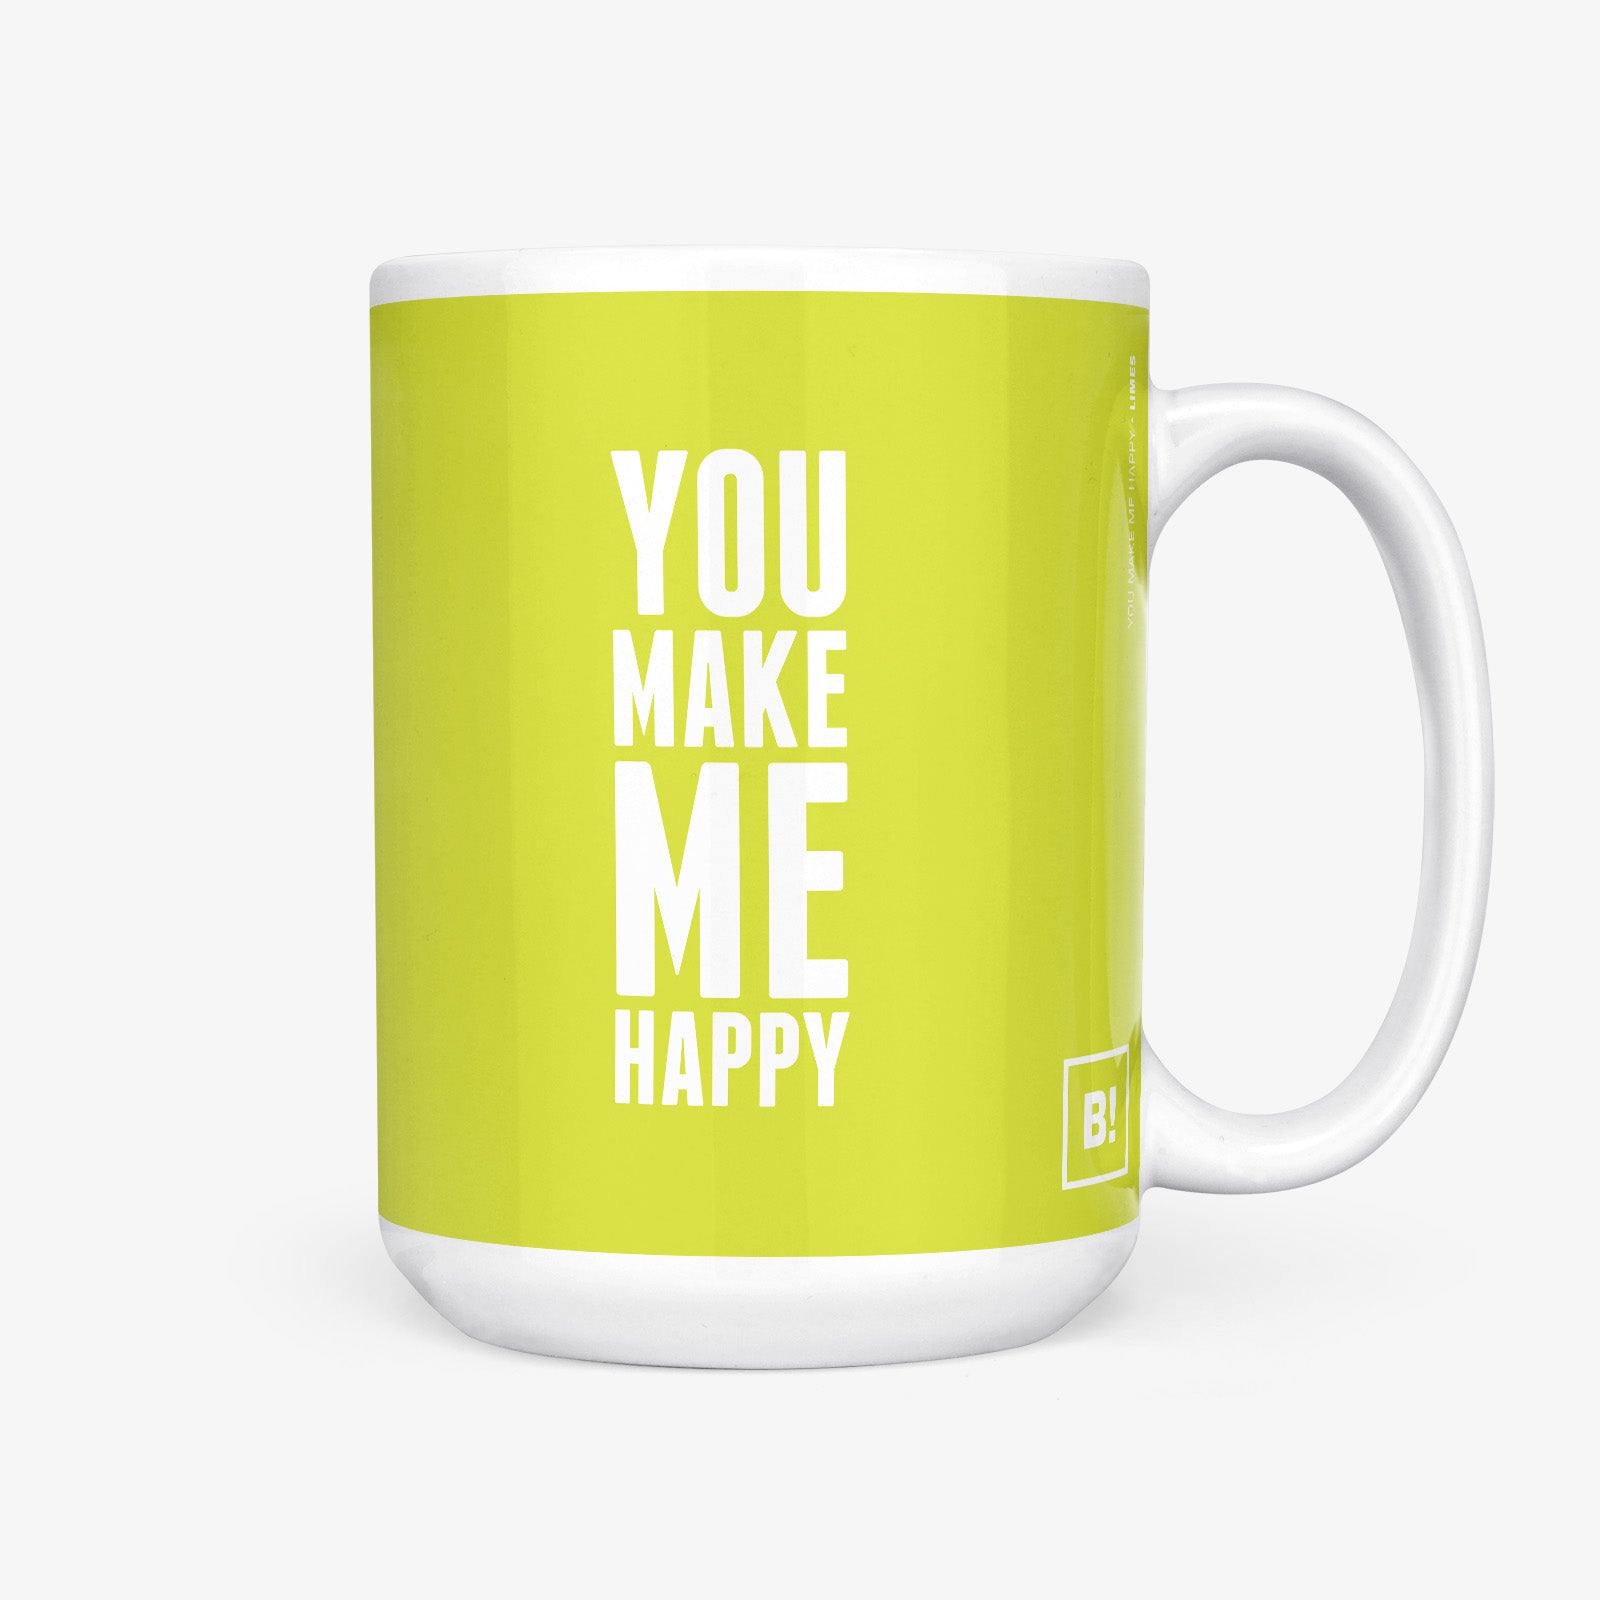 Be inspired by our "You Make Me Happy Coffee Mug" Limes Coffee Mug. Featuring a 15oz size with the handle on the right.